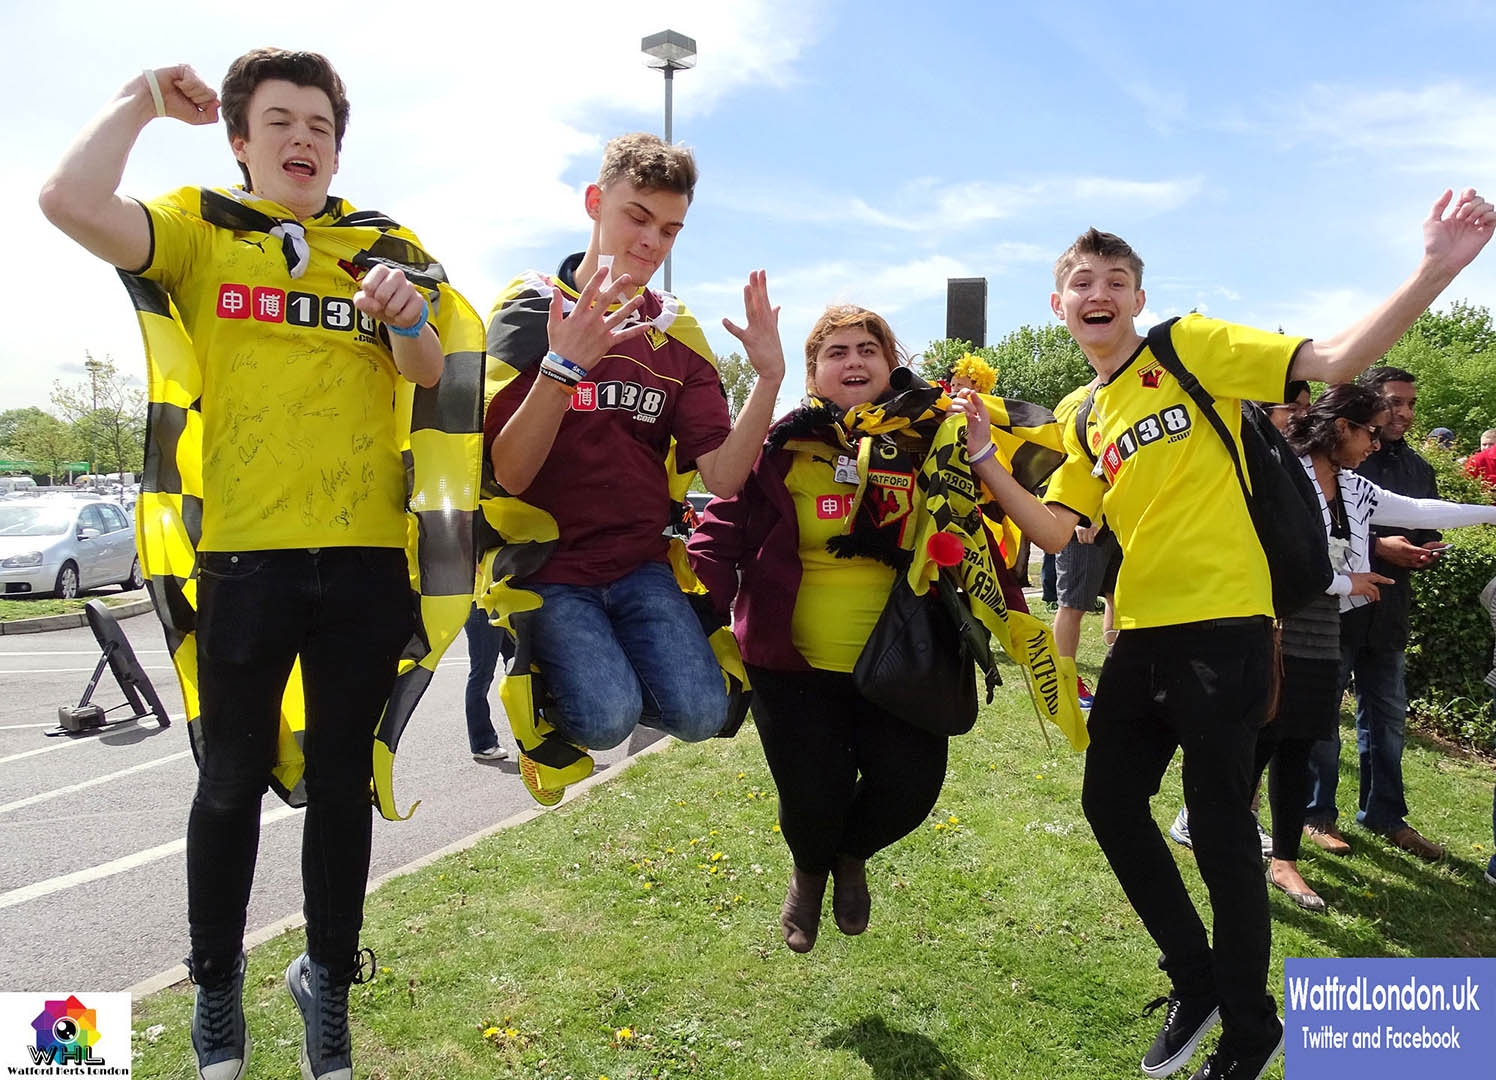 Watford Fans where literally Jumping for Joy